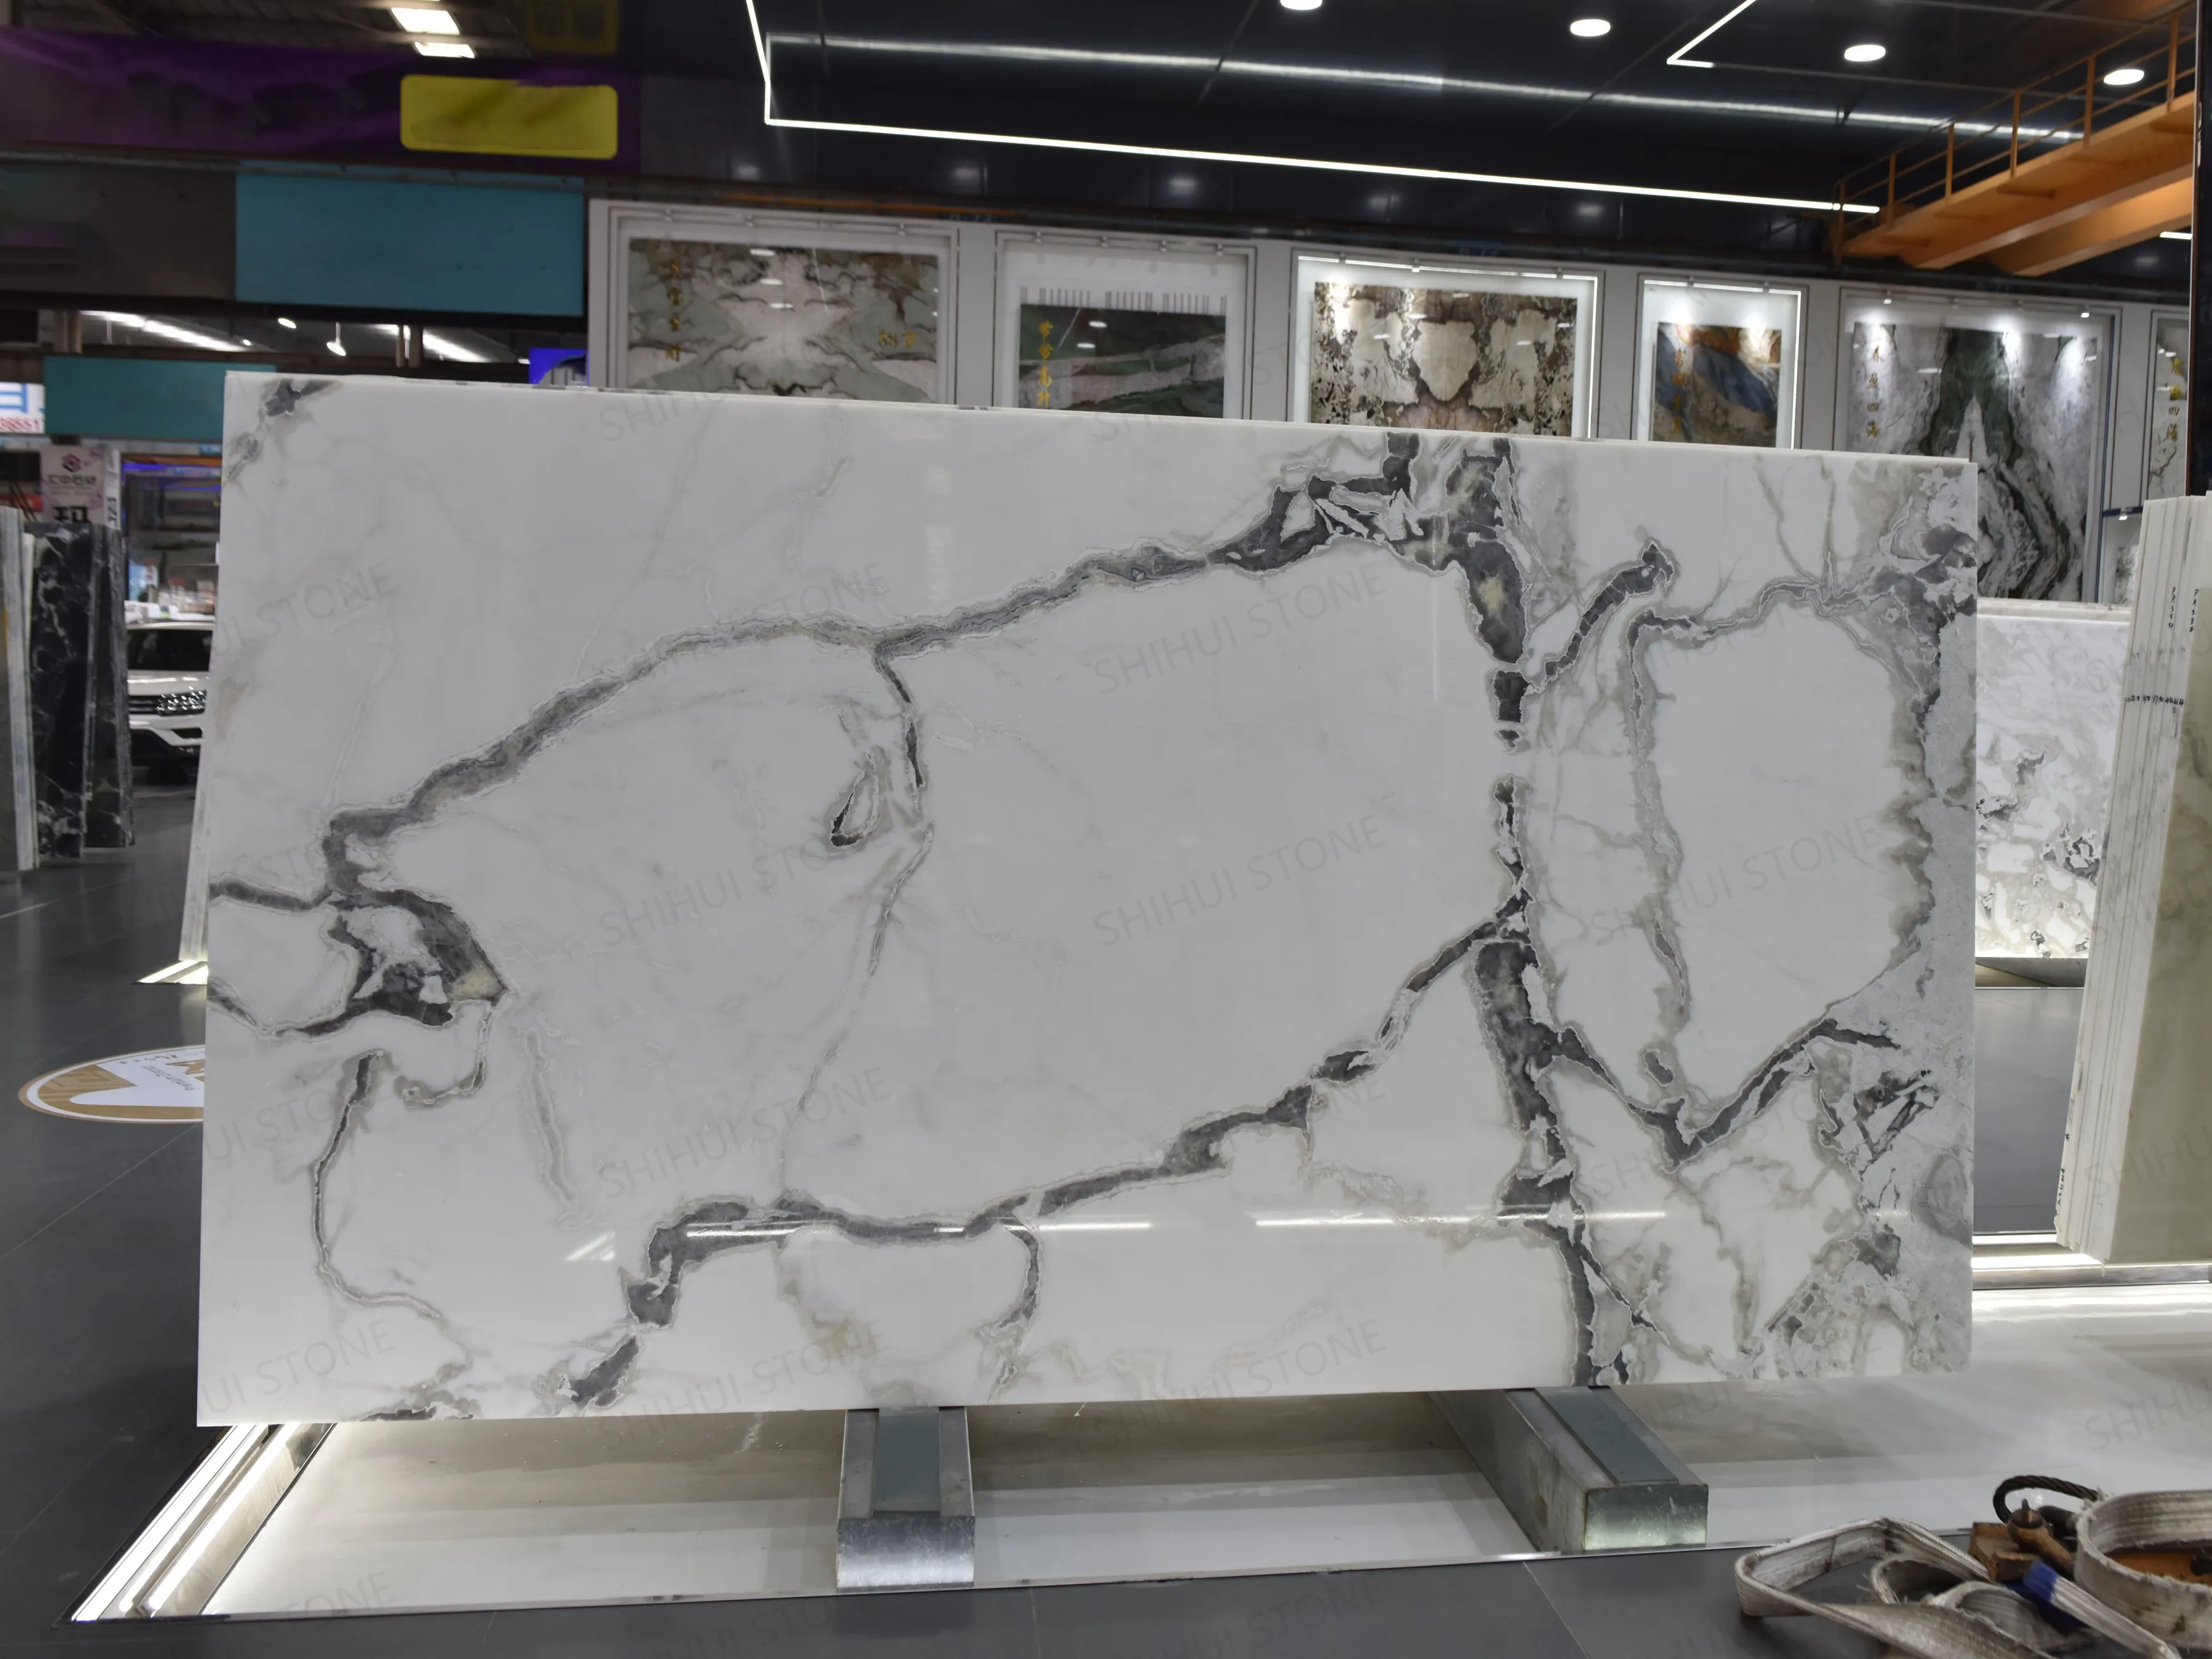 SHIHUI Luxury Natural Stone Oyster White Quartzite Slab 18mm Thick Polished Modern Countertops Wall Floor Marble Top